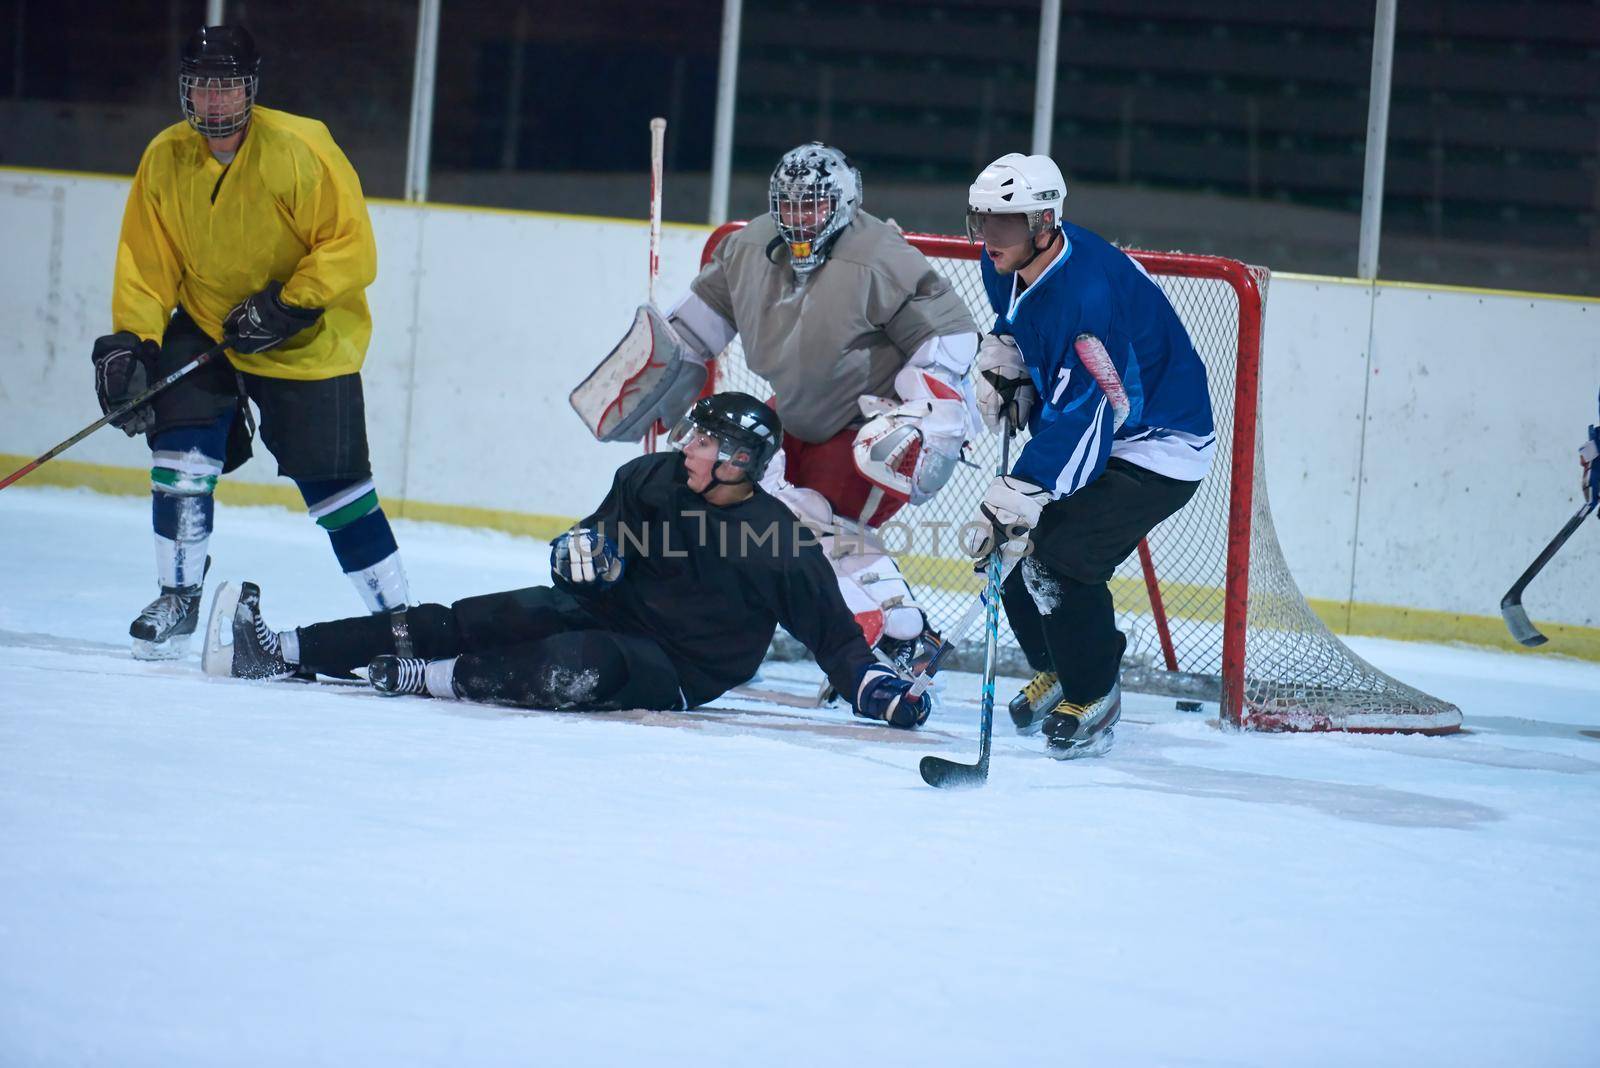 ice hockey goalkeeper  player on goal in action